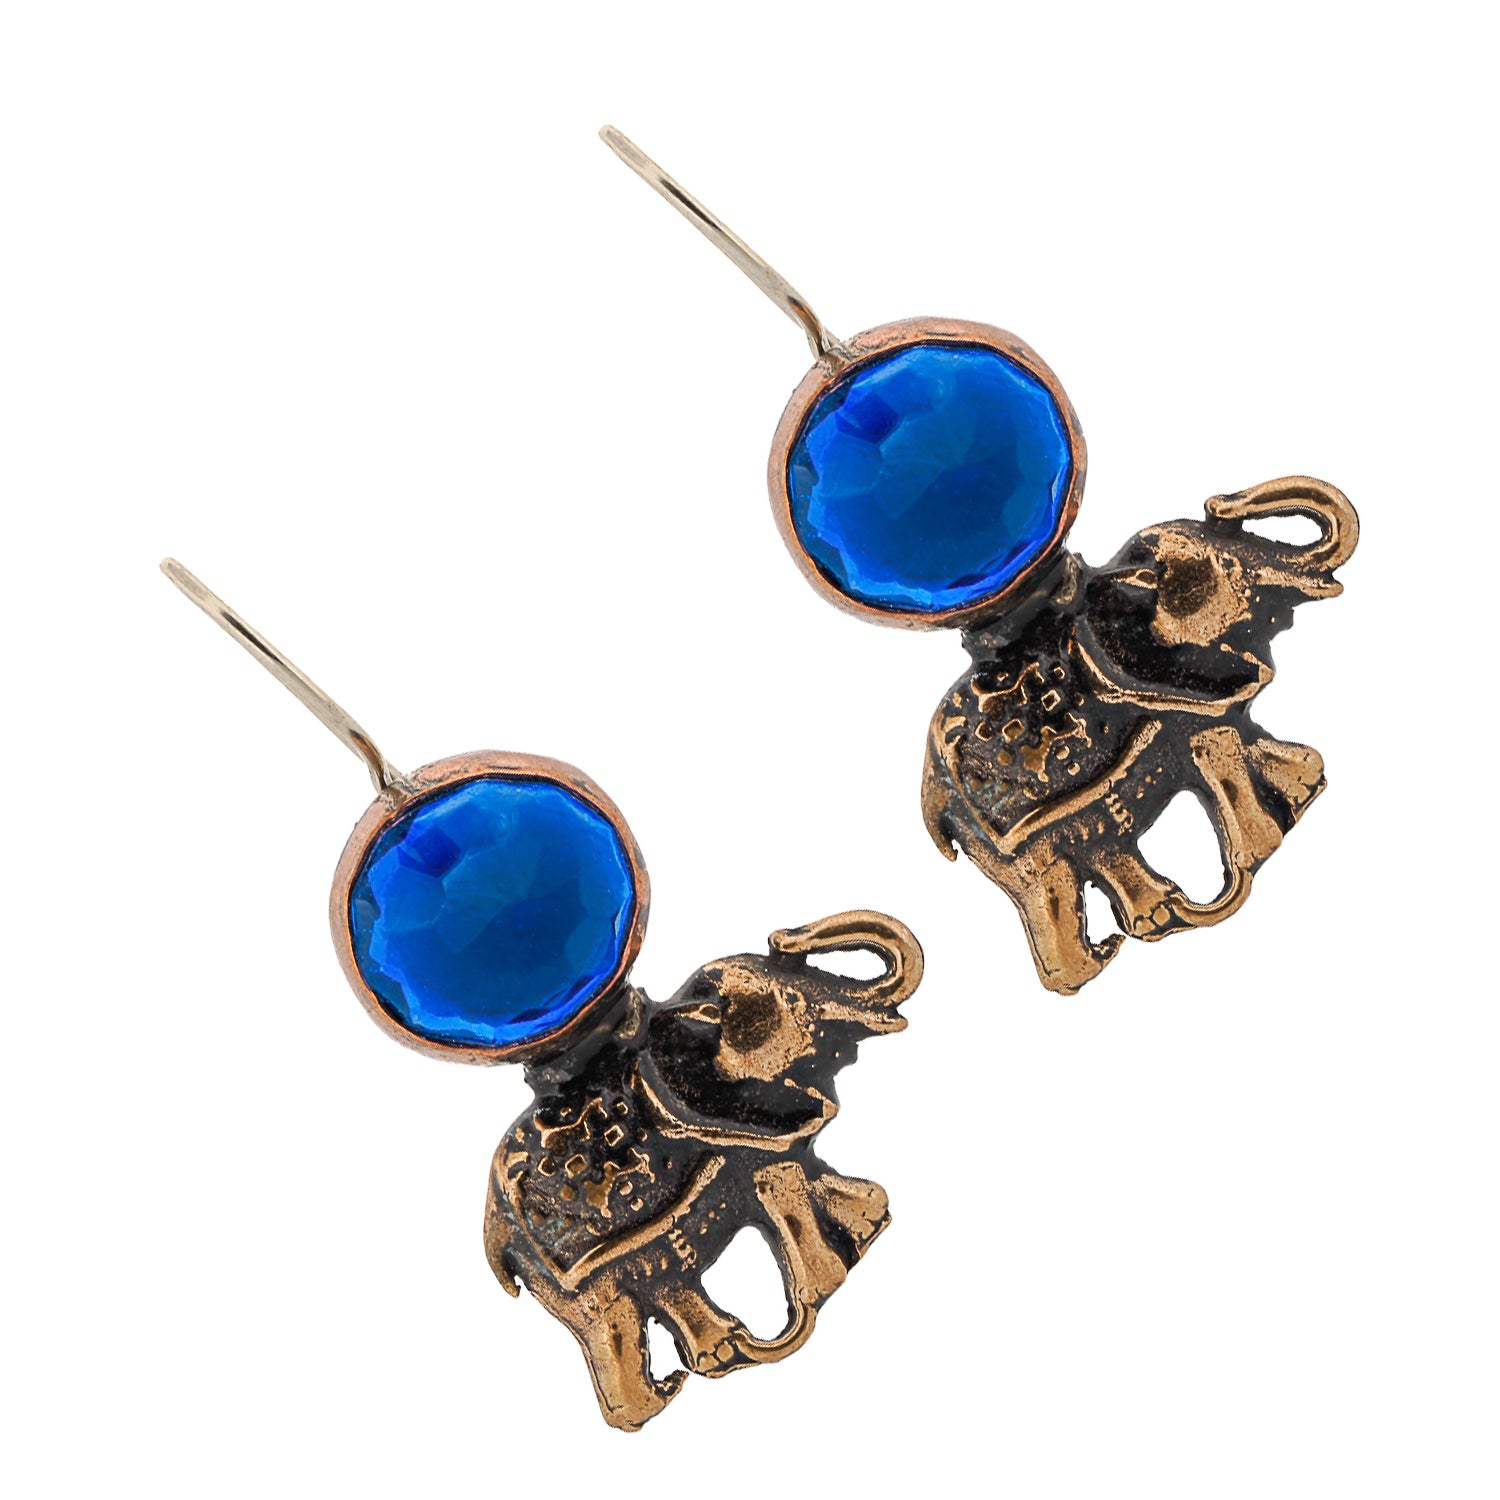 Unique Elephant Earrings in bronze with sapphire gemstones, an expression of positivity and joy.